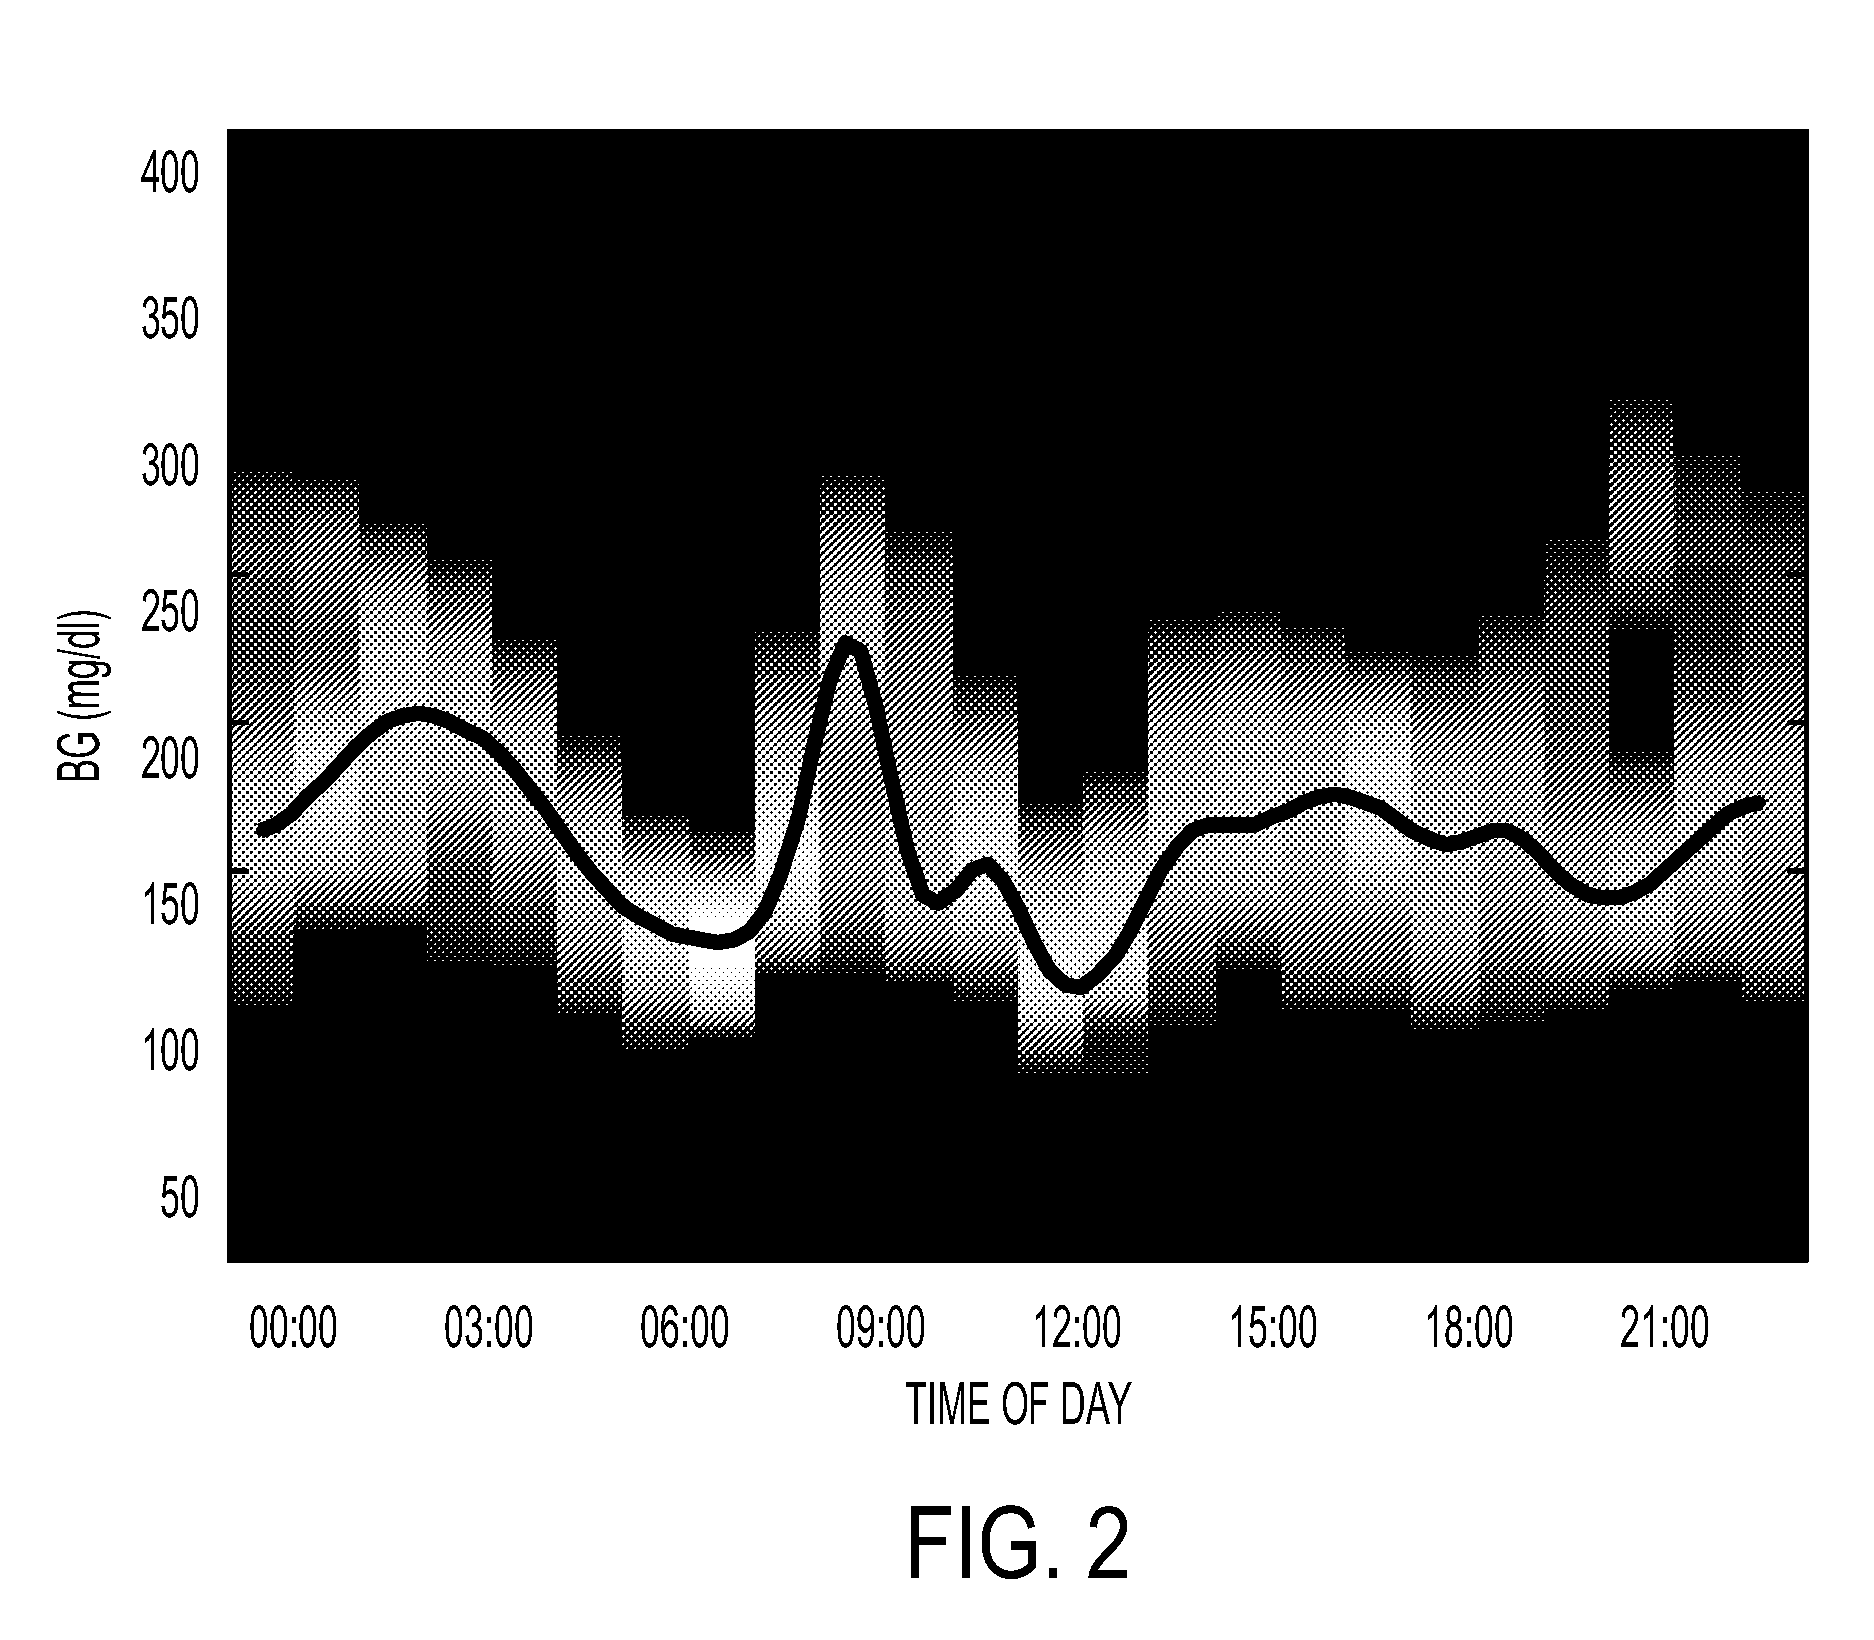 Method, System and Computer Readable Medium for Adaptive and Advisory Control of Diabetes